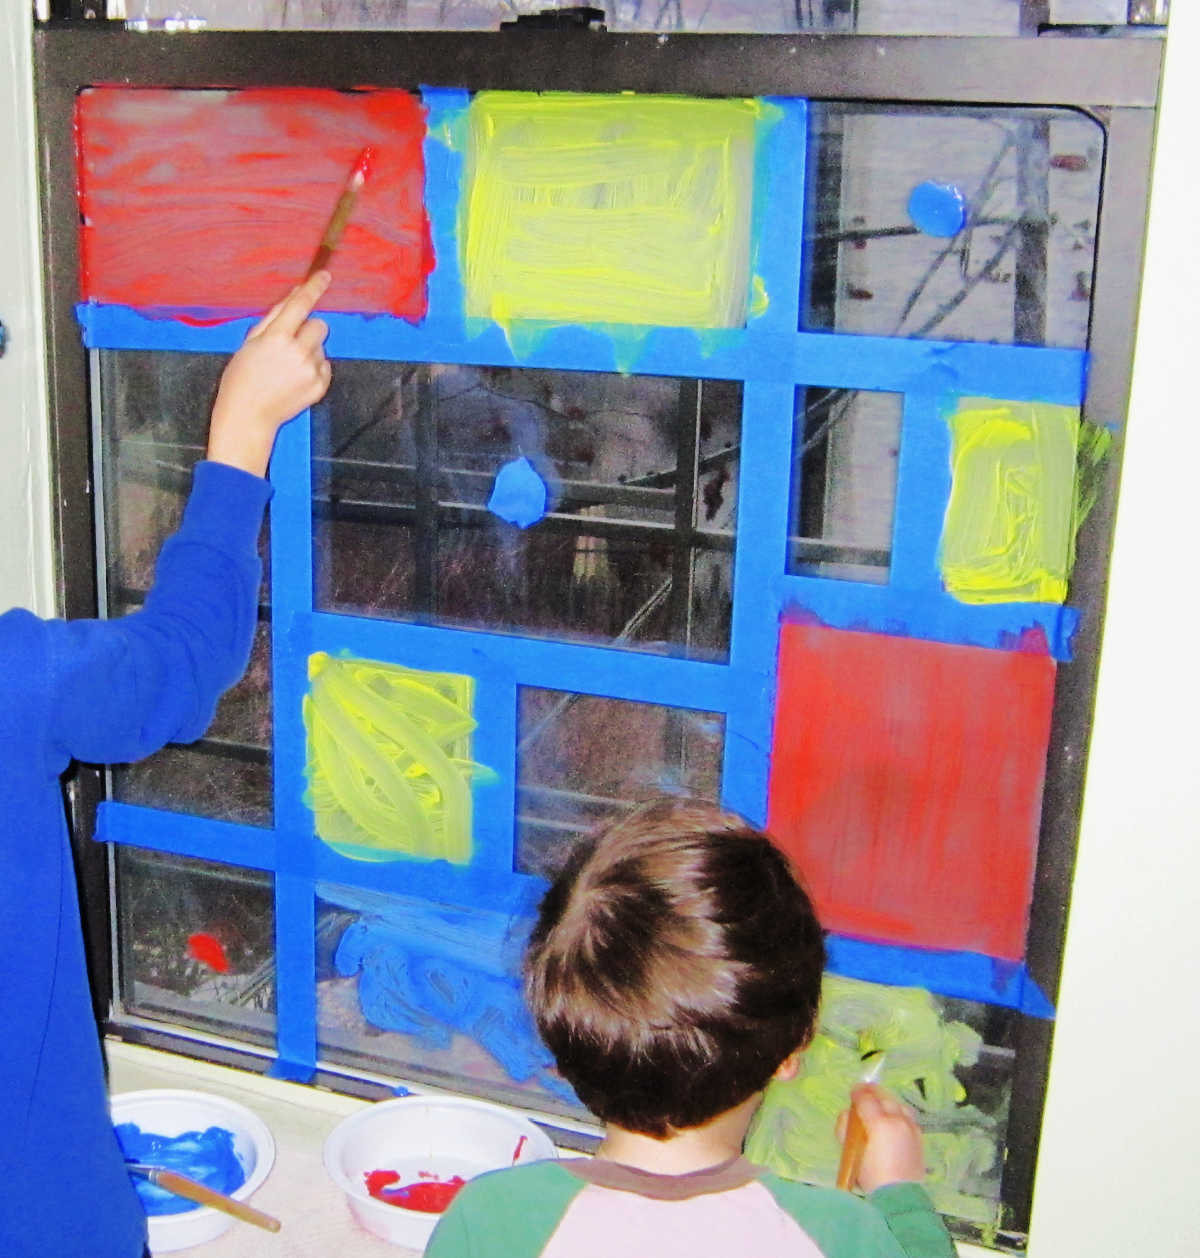 Kids painting on window covered in blue tape.